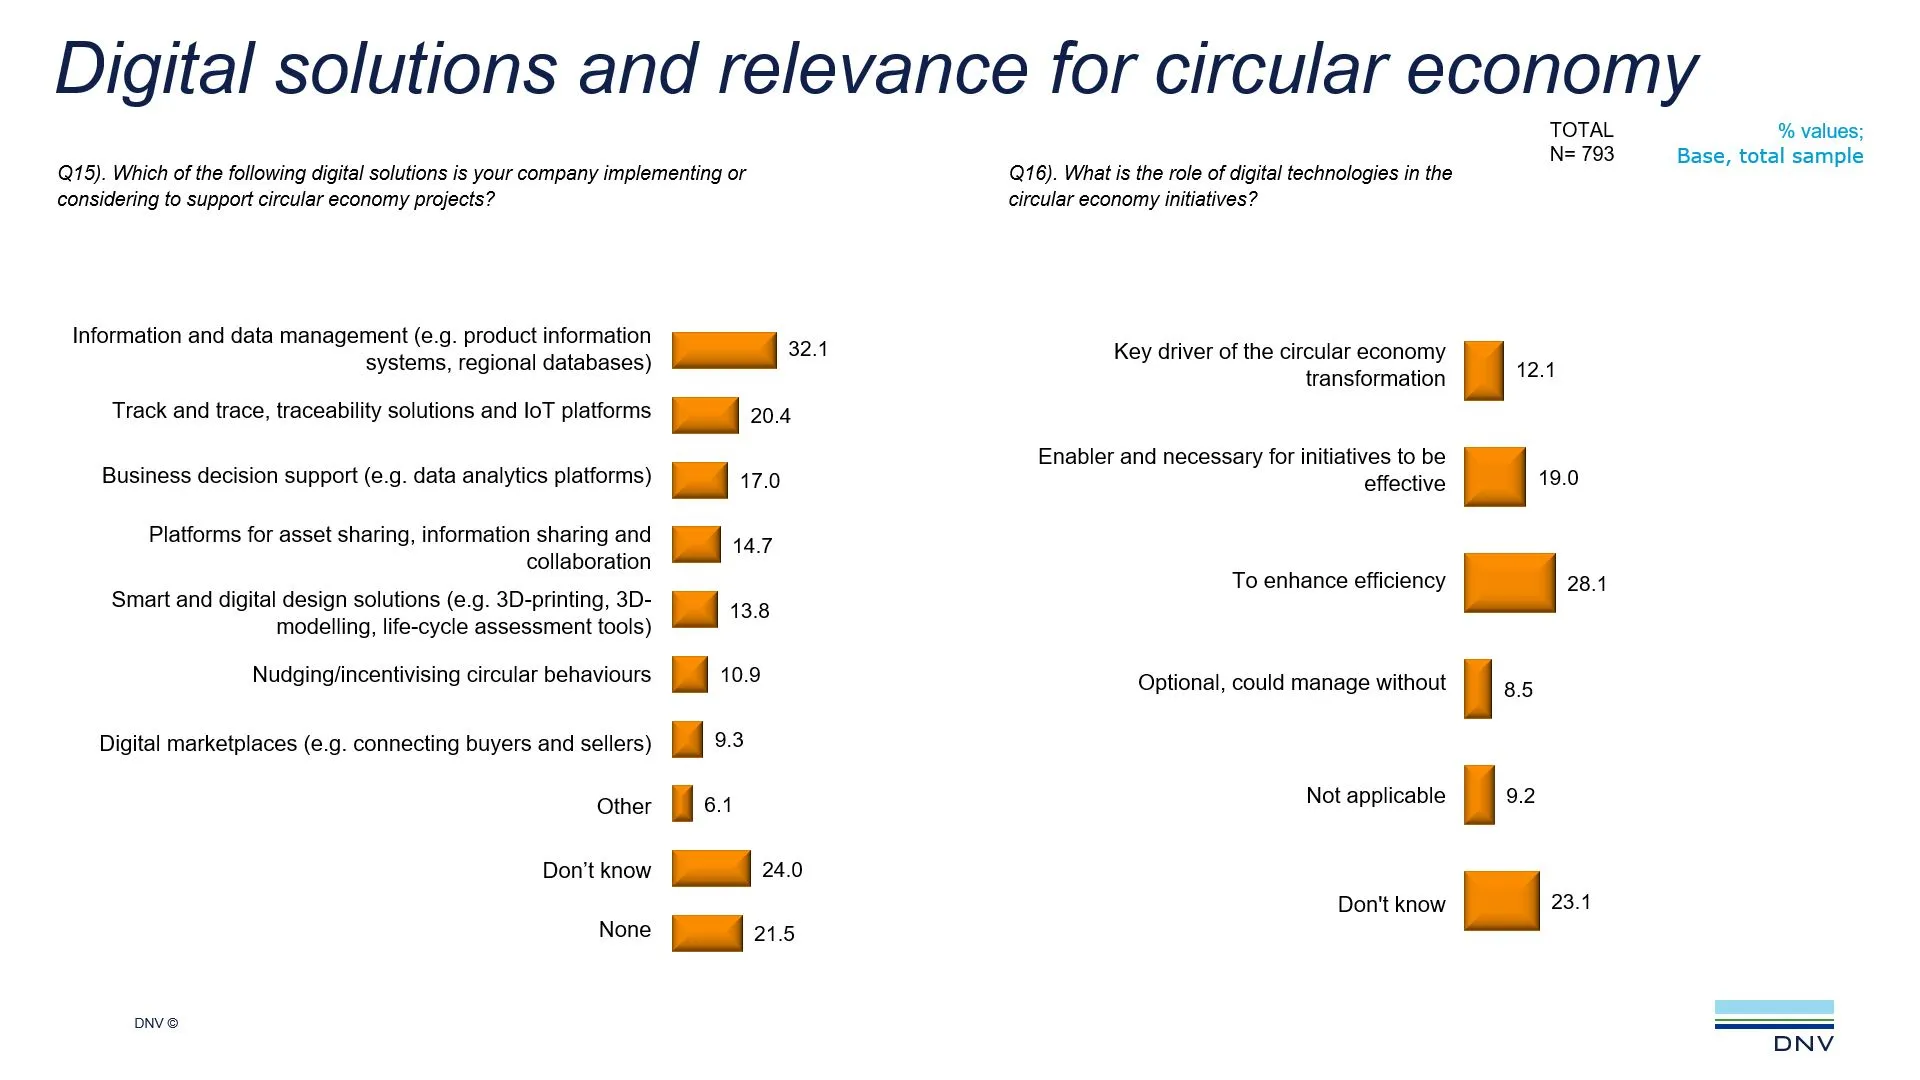 Digital solutions and relevance for circular economy